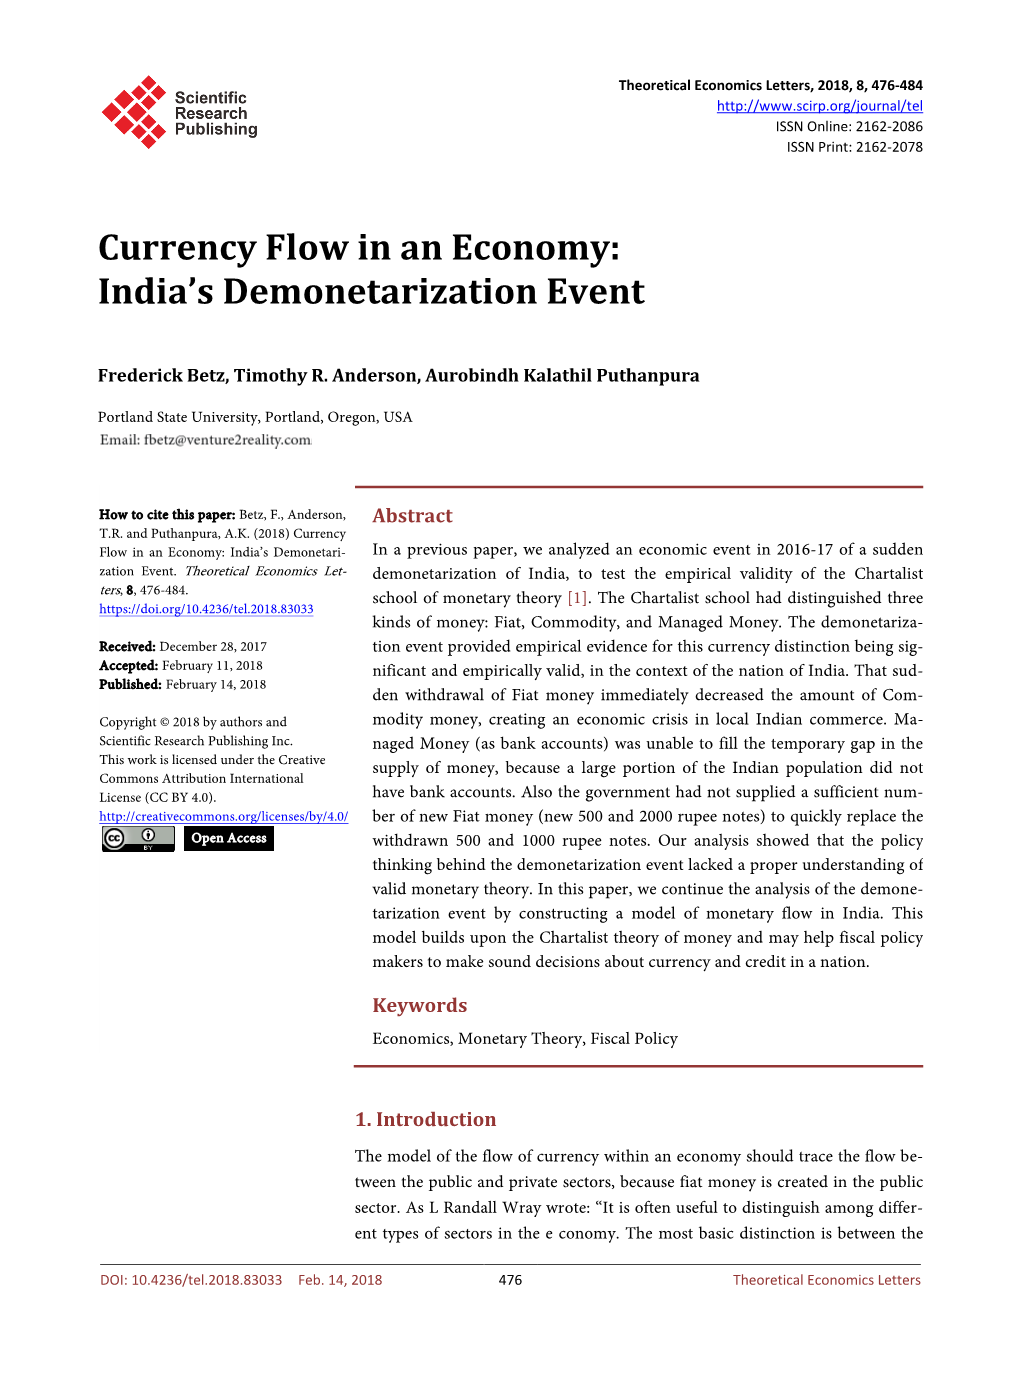 Currency Flow in an Economy: India’S Demonetarization Event